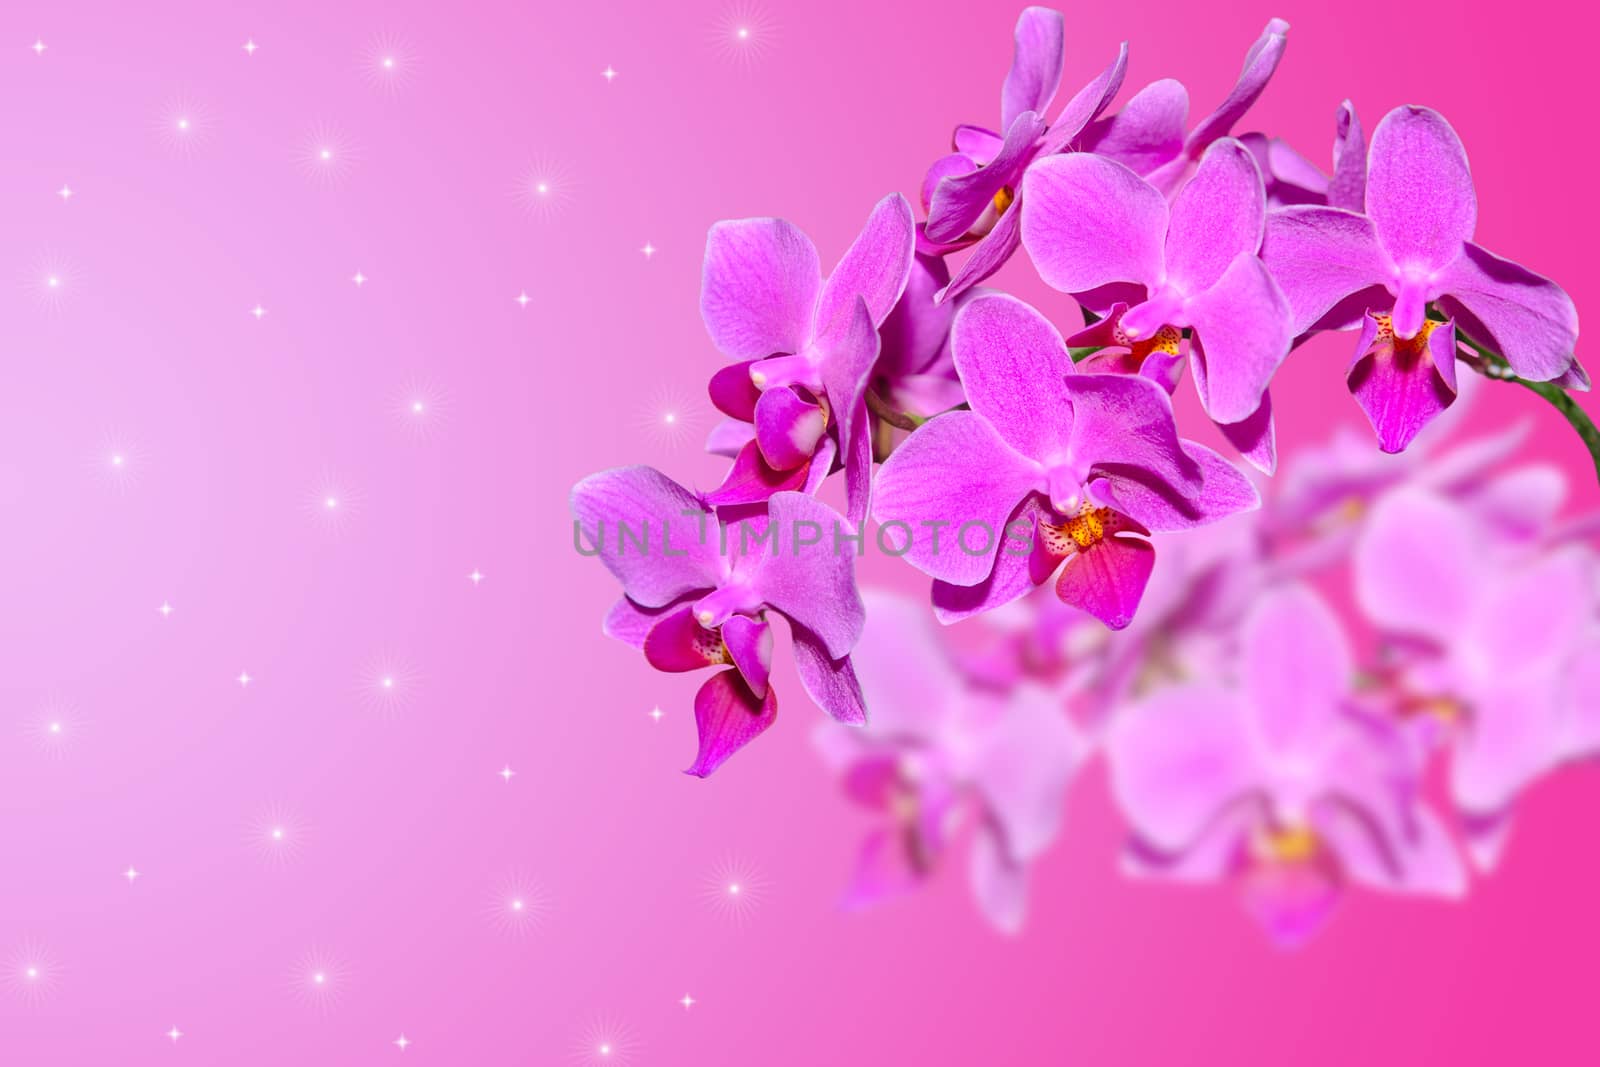 Branch of lilac orchid flowers on gradient blurred background with free area for your text